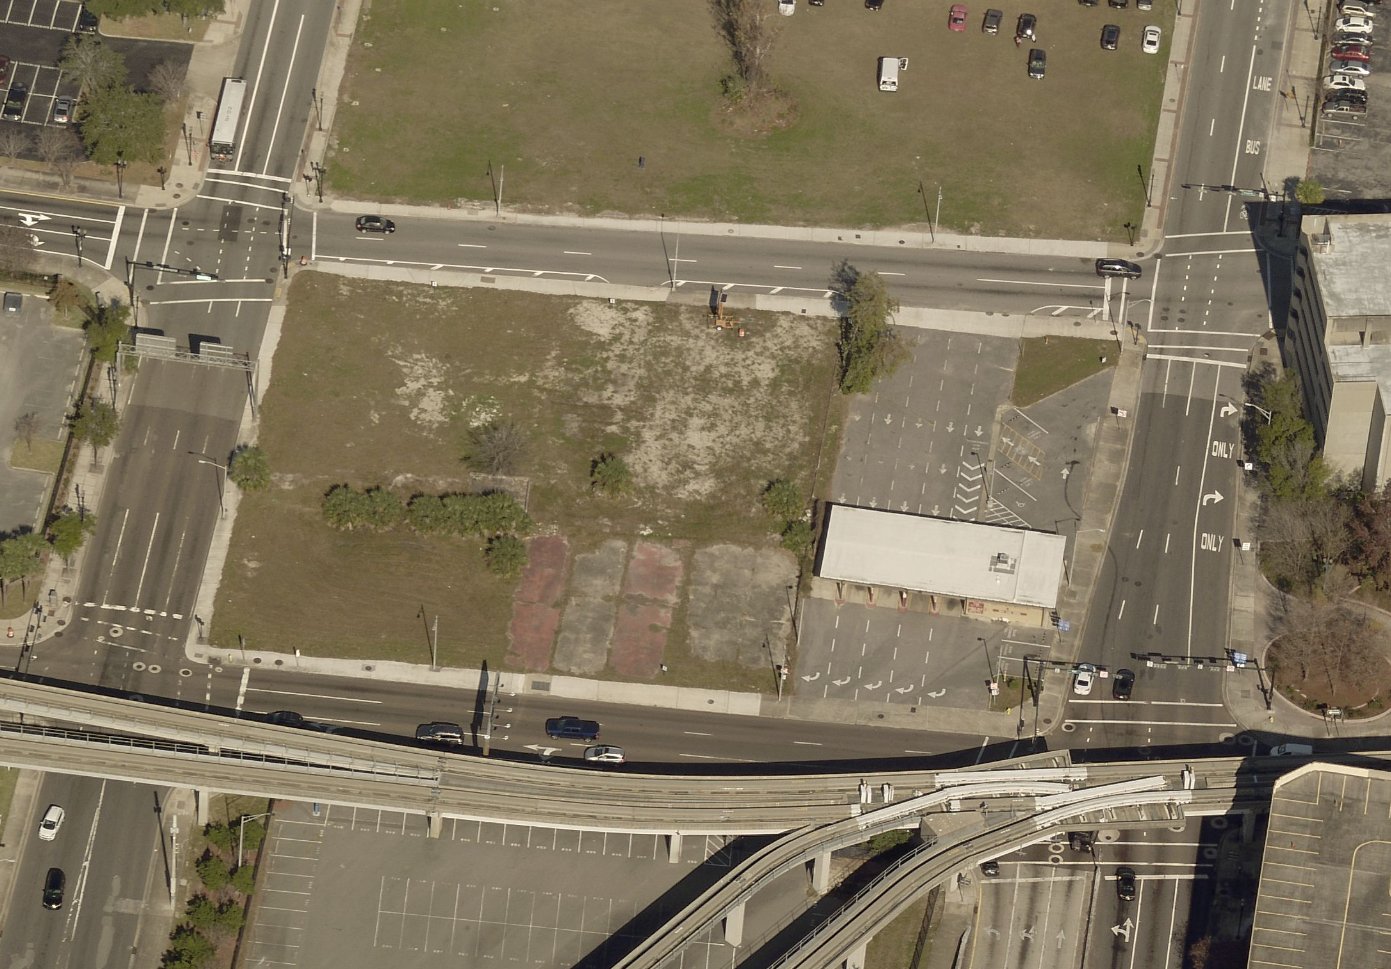 A city aerial view of the property shows a  former drive-thru bank branch at the site.